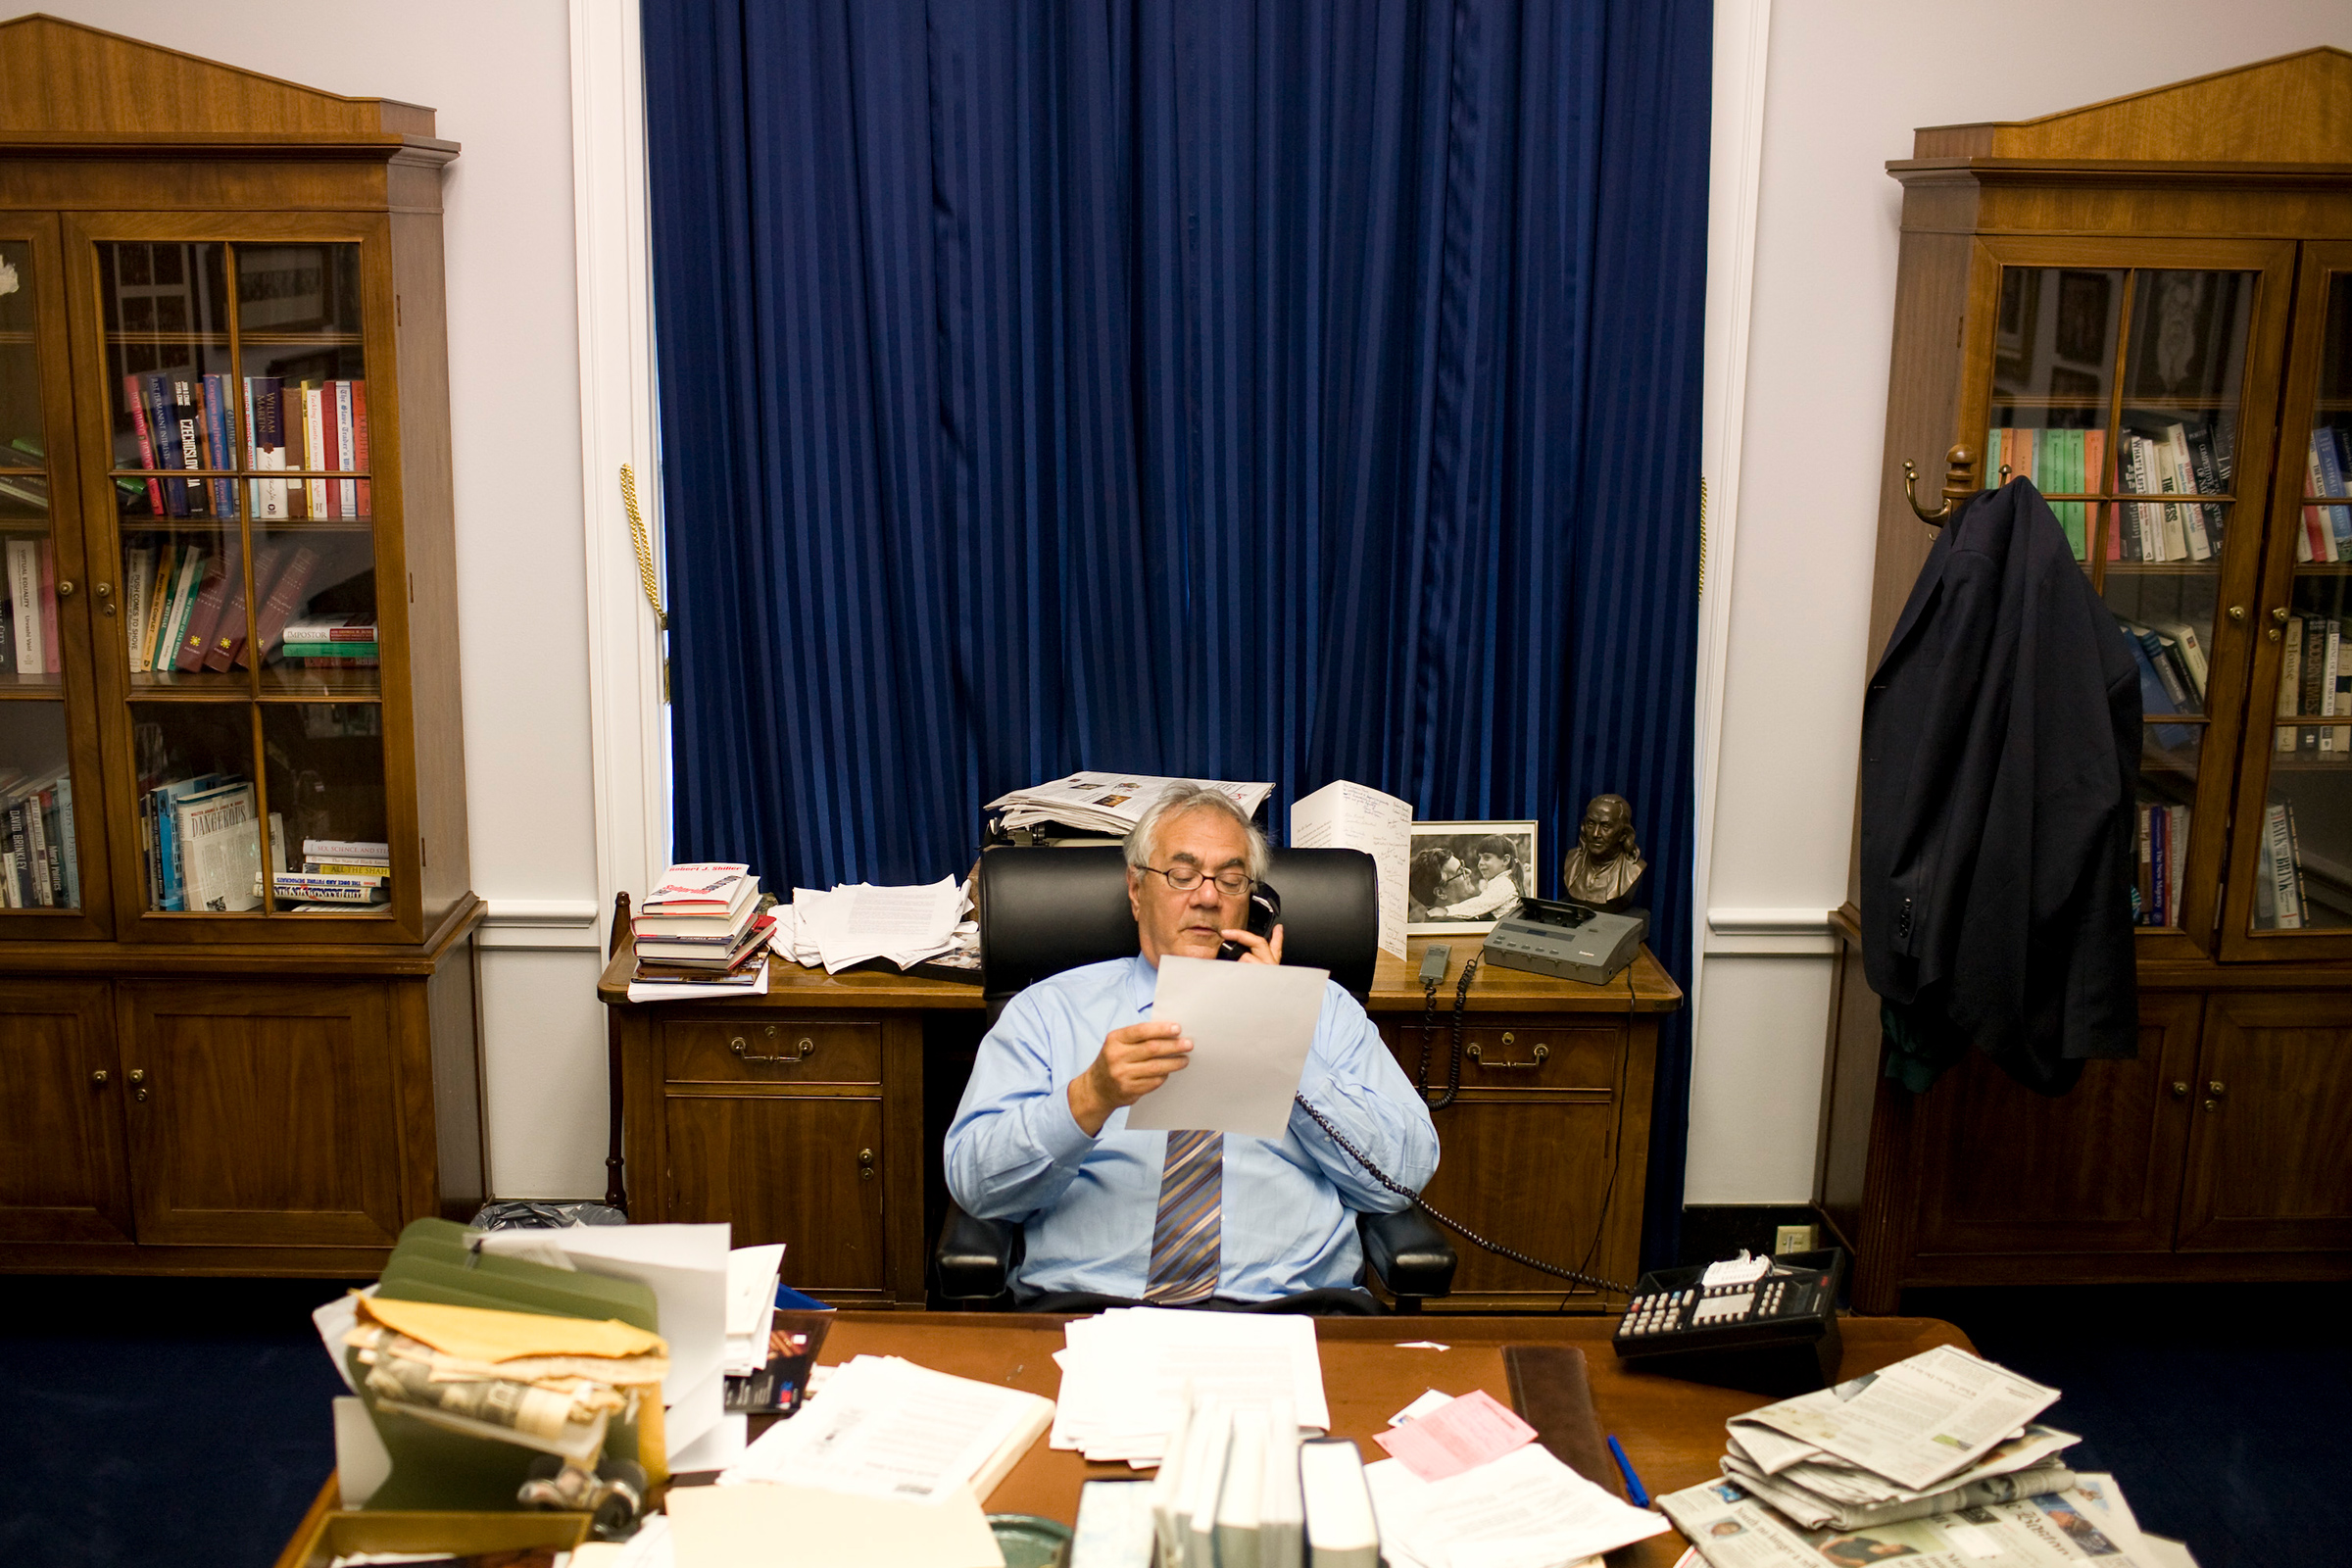 Frank, then chairman of the House Committee on Financial Services, talks on the phone while at work in his office on Capitol Hill in Washington, Sept. 19, 2008. (Brendan Hoffman—The New York Times/Redux)